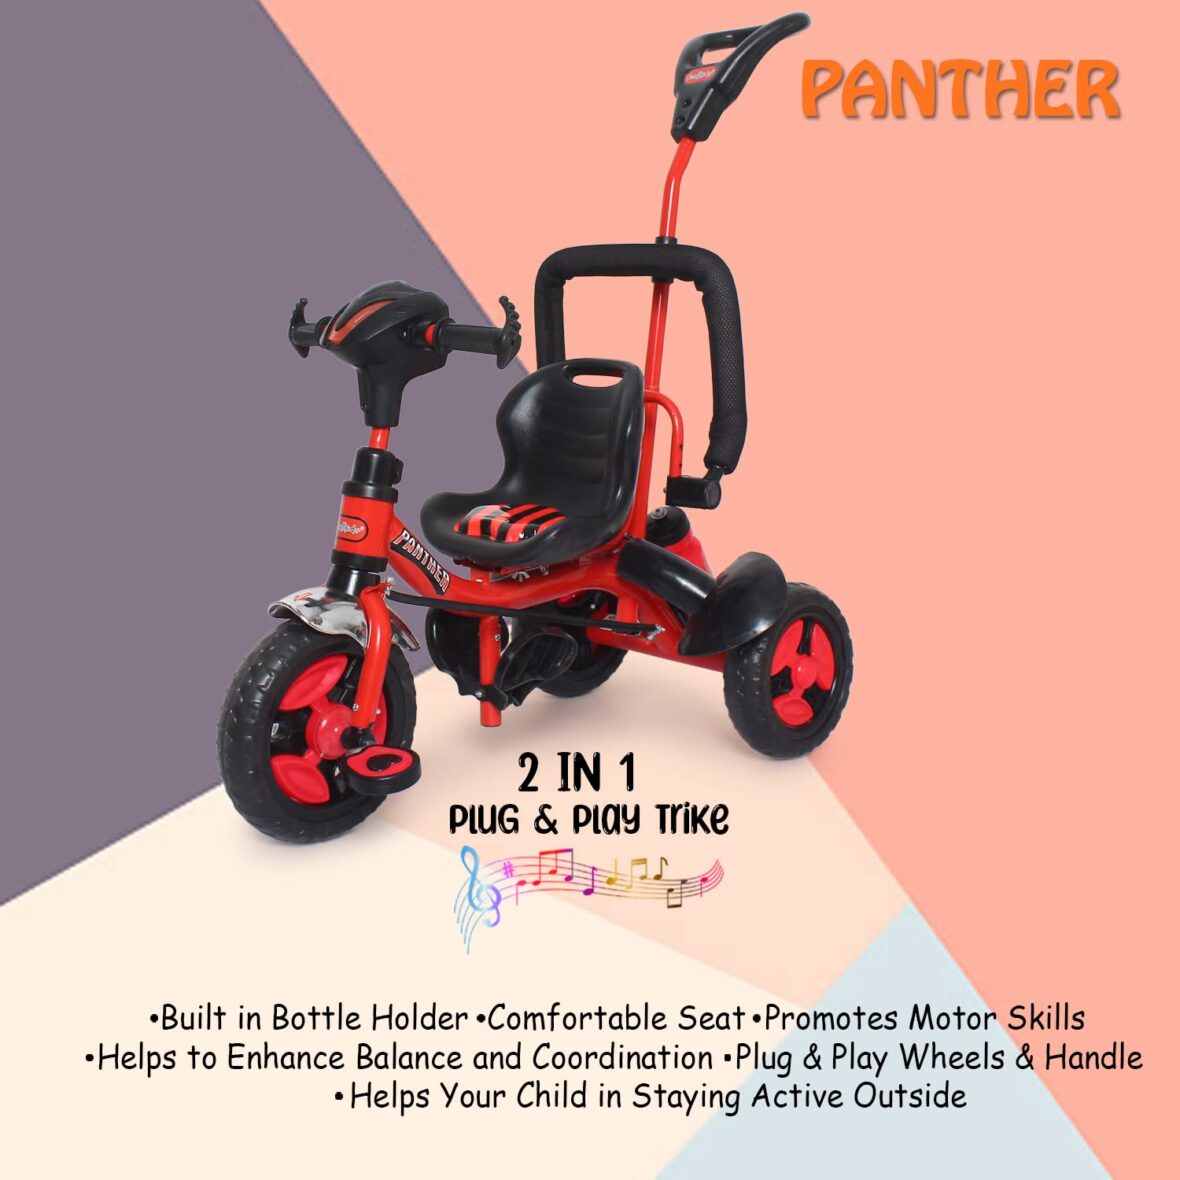 FunRide Kids Tricycle Rider Panther with Removable Parental Control Handle (33)